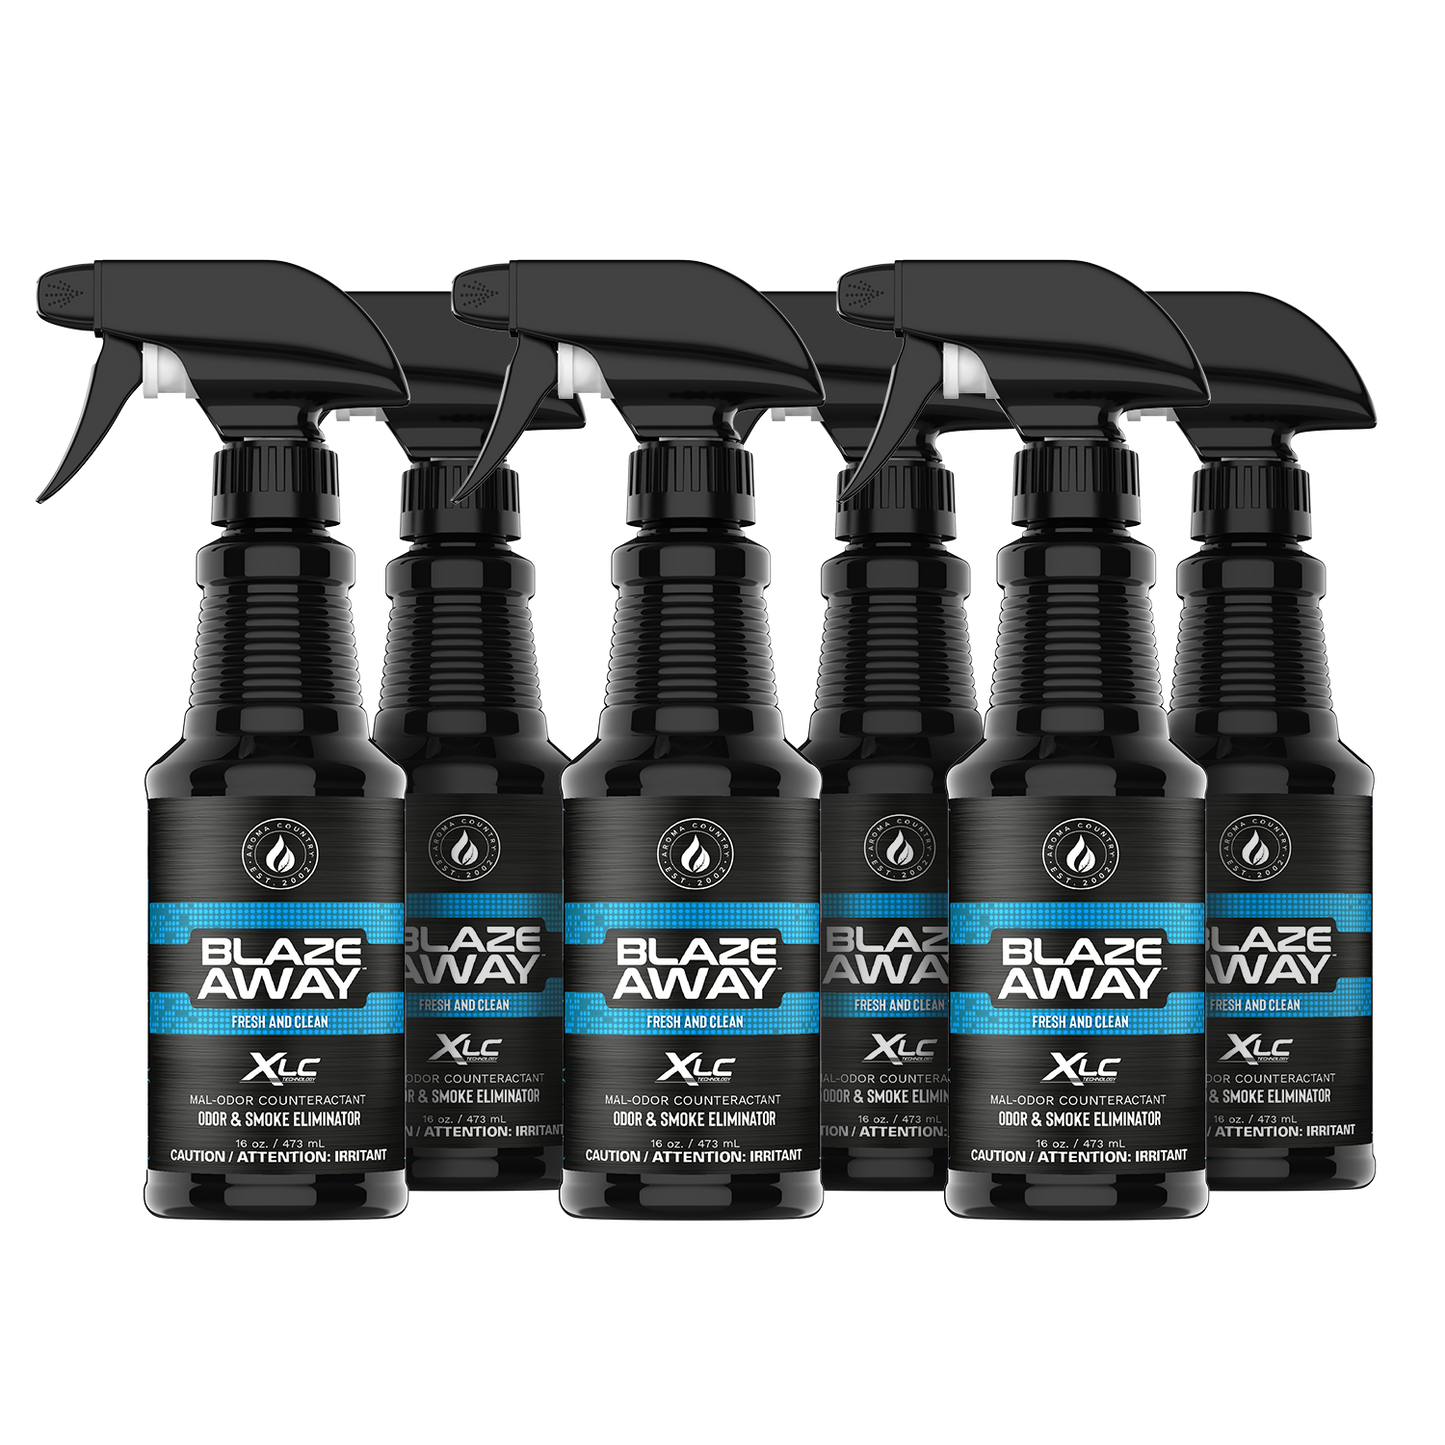 16 ounce 6 pack Fresh and Clean Mal-odor counteractant.